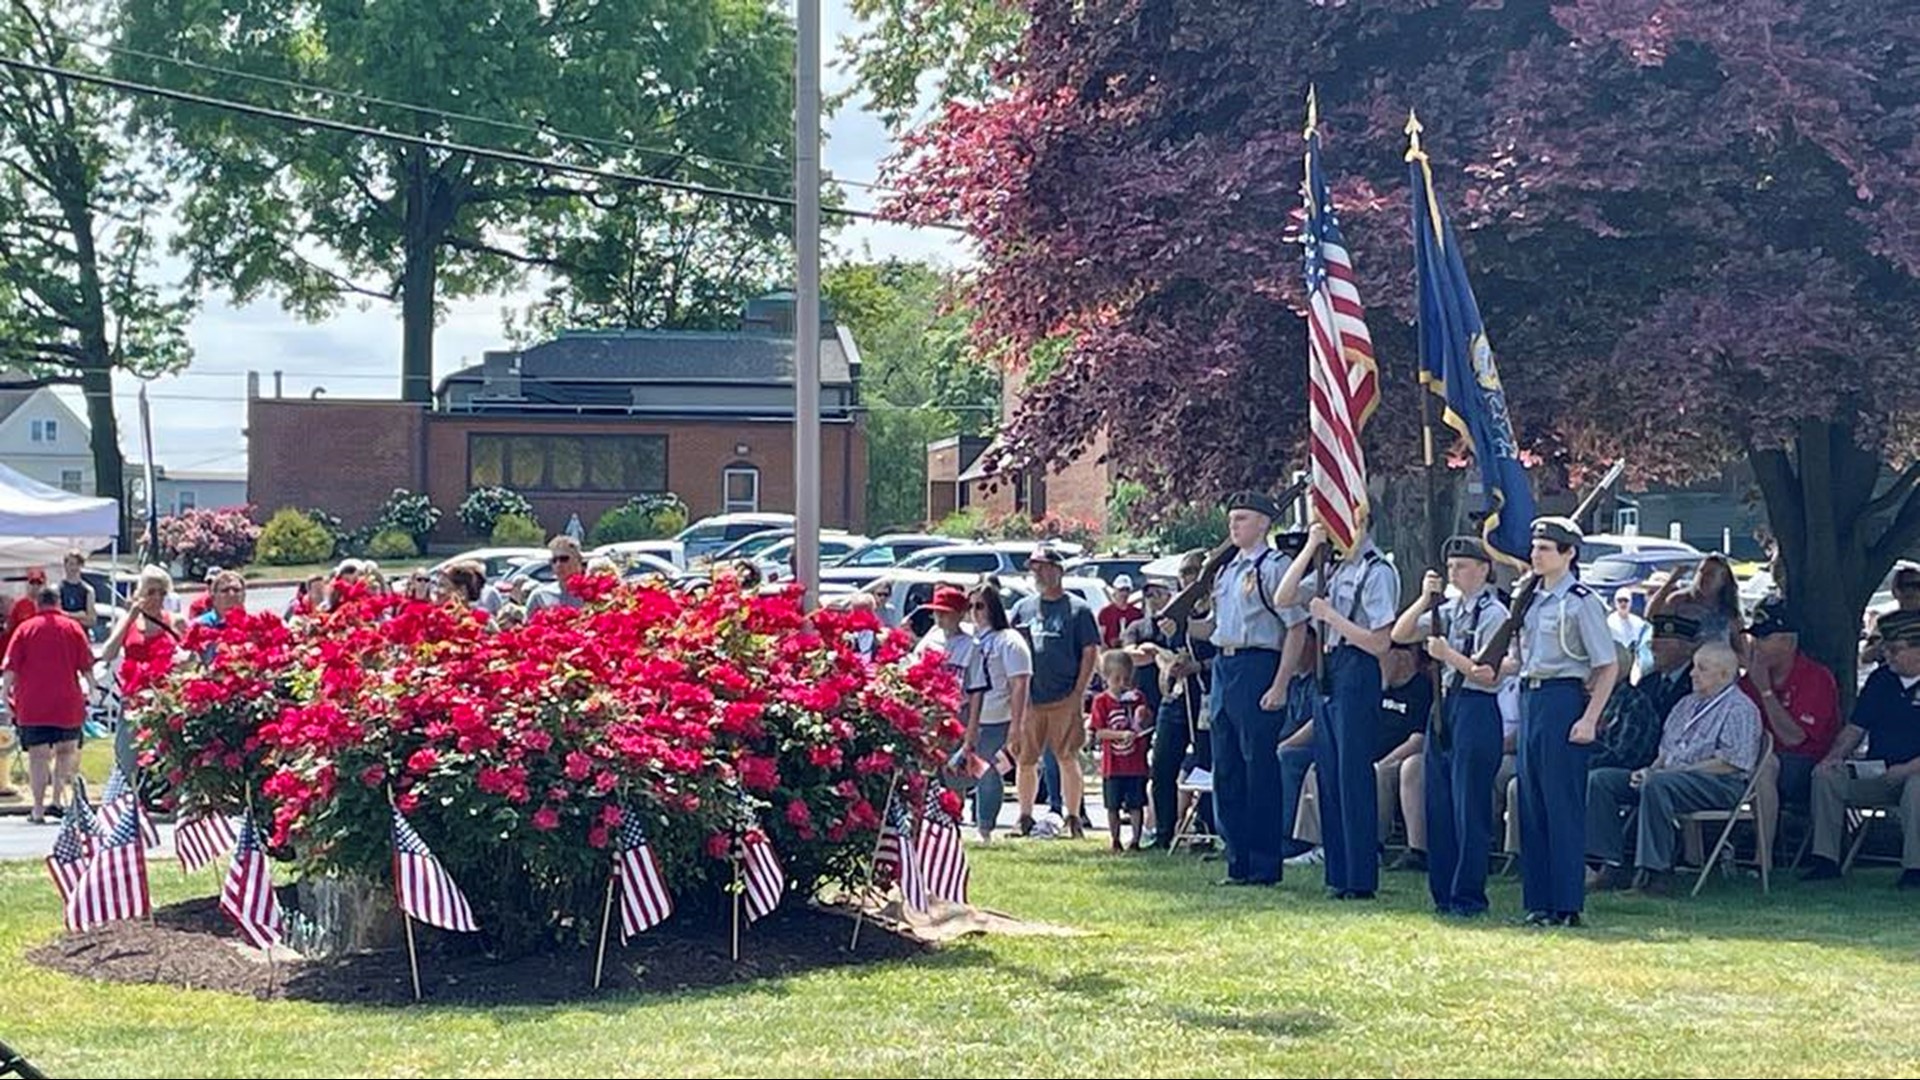 Communities across central Pennsylvania observed Memorial Day on Monday, May 29 with events honoring fallen soldiers.